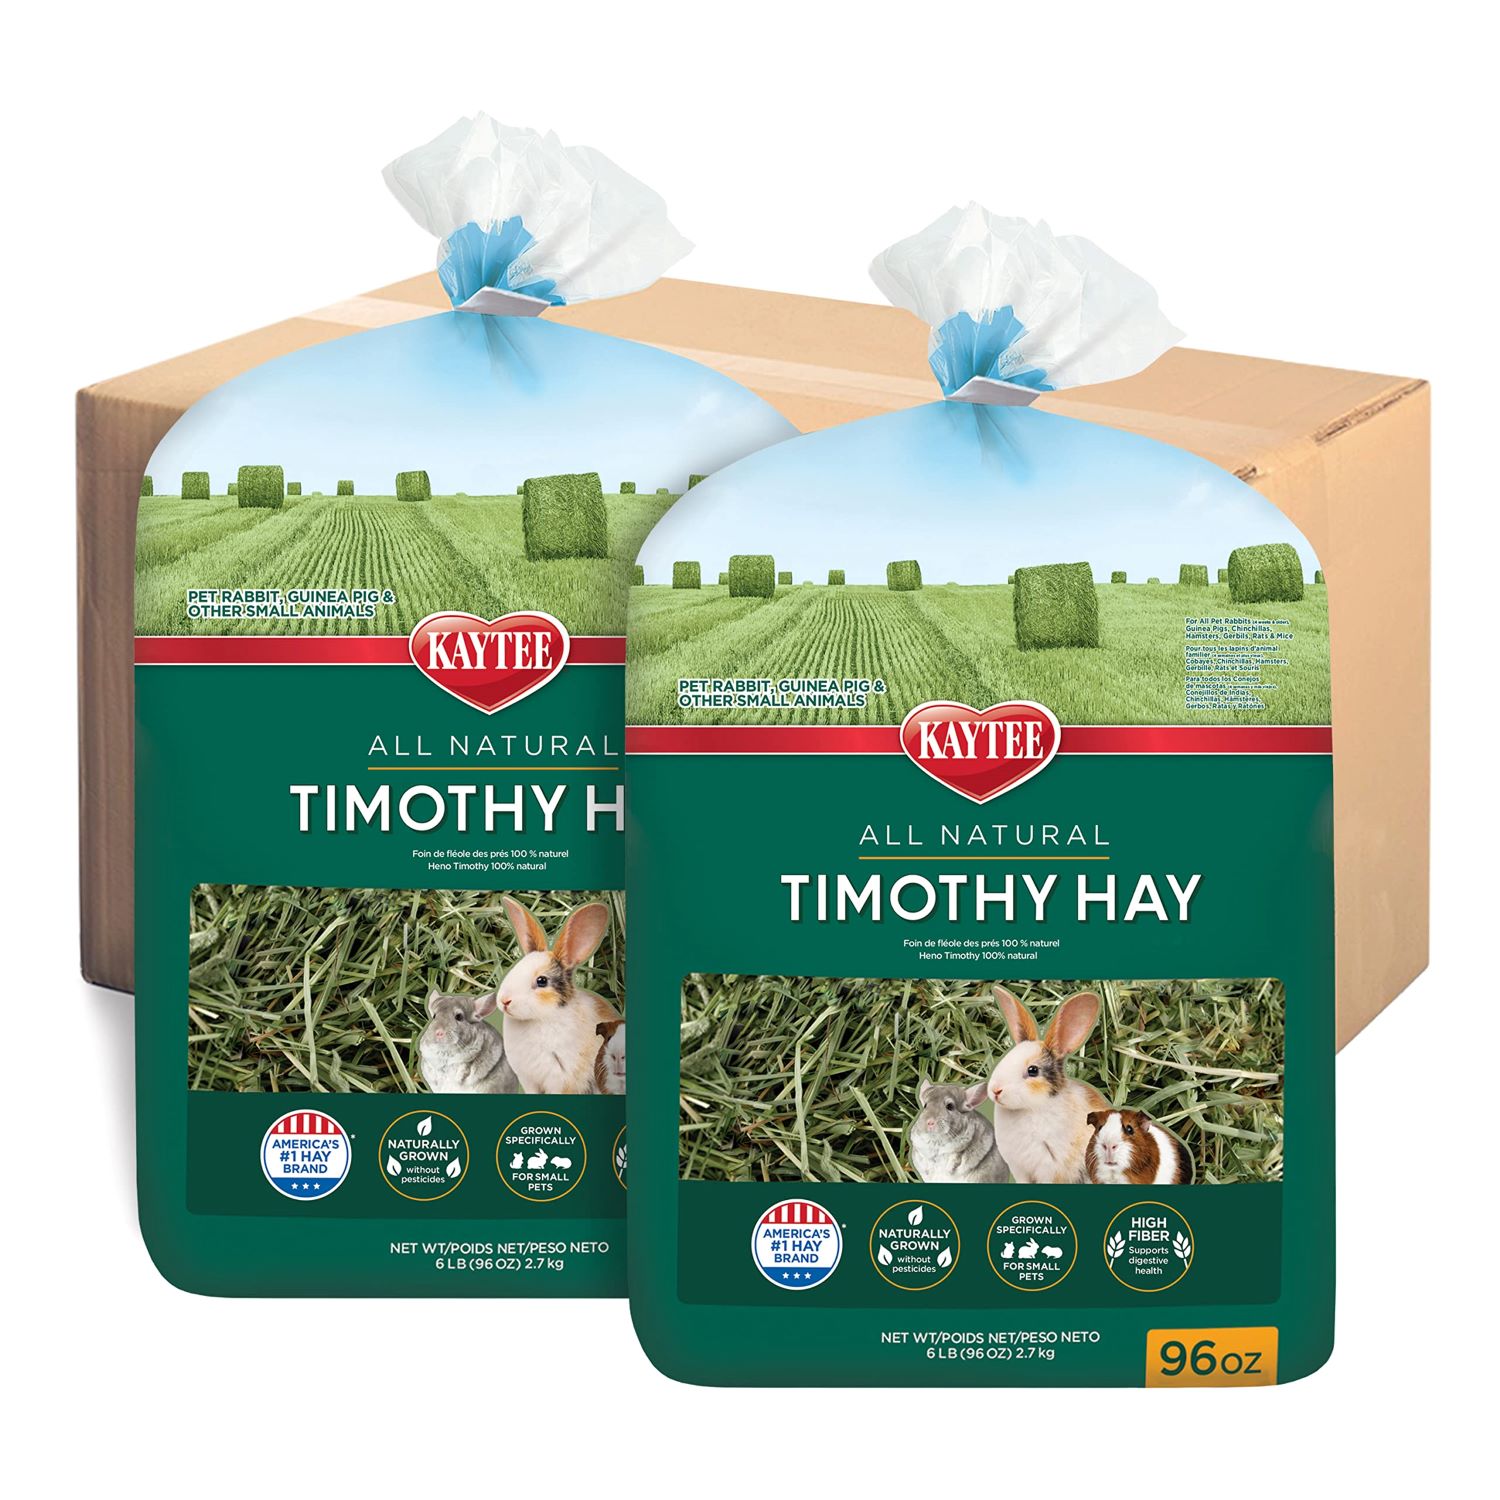 How To Store Timothy Hay